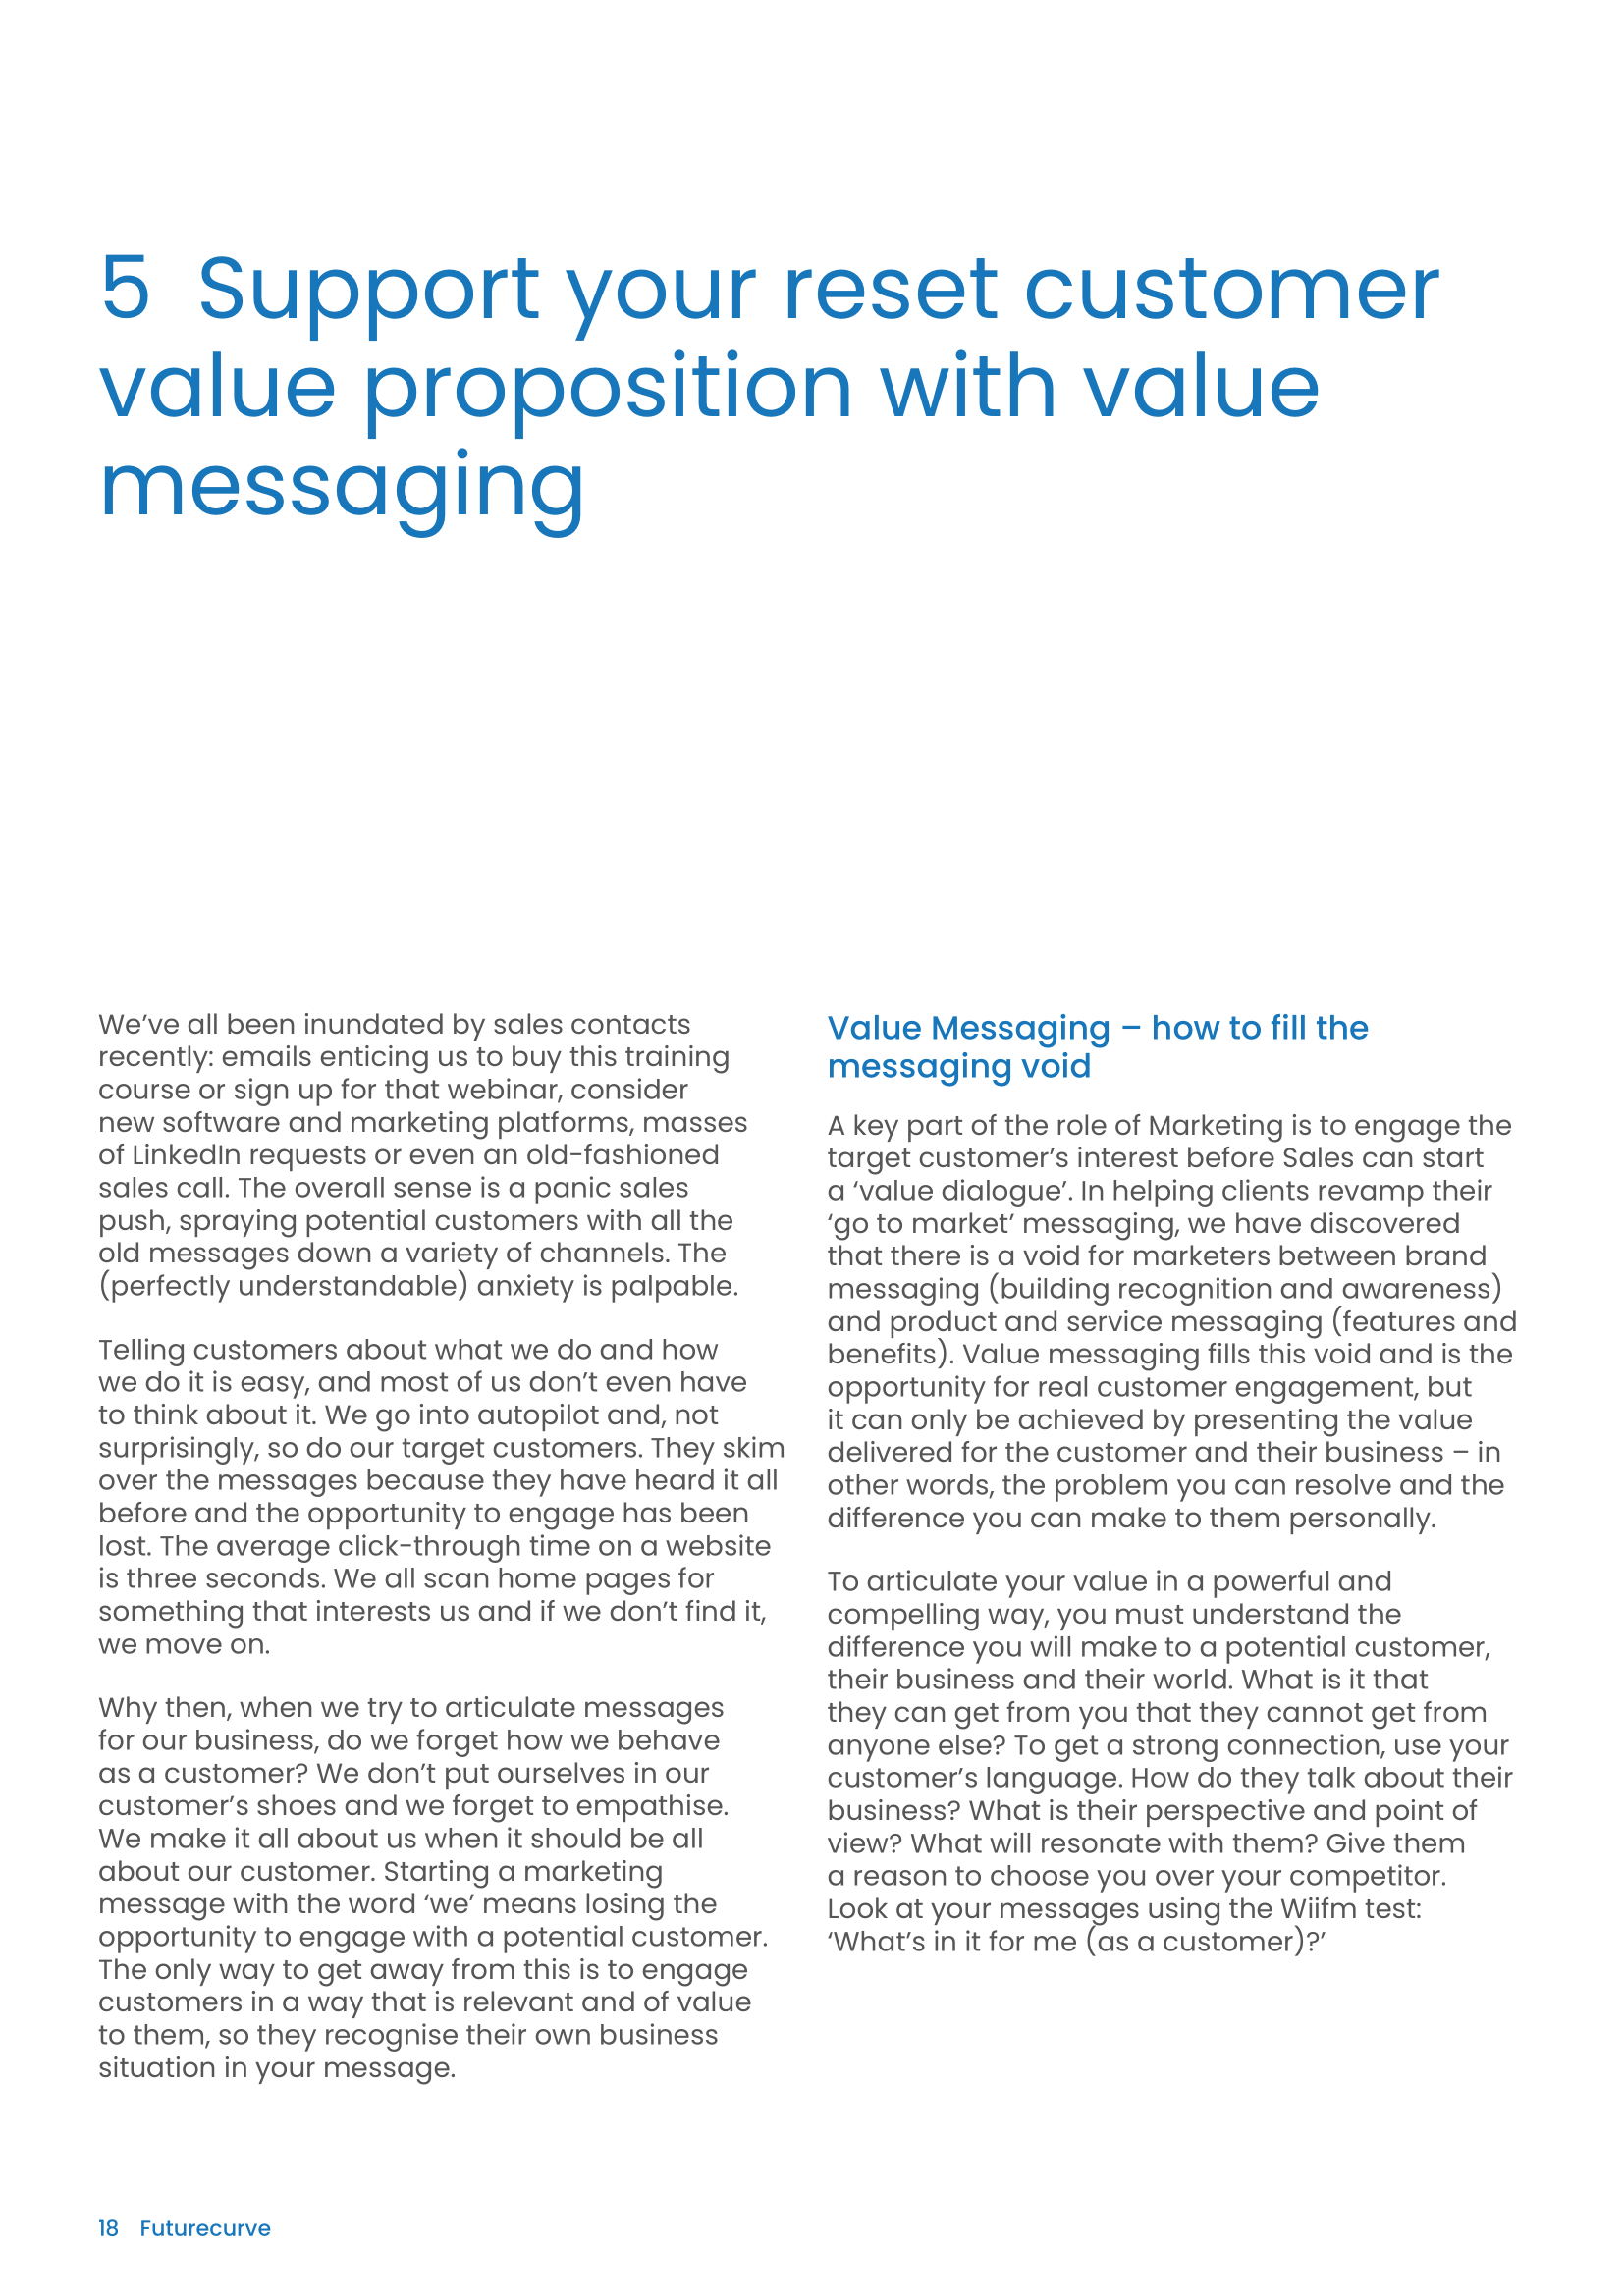 What do customers want now - A Futurecurve White Paper (2) (1)-18